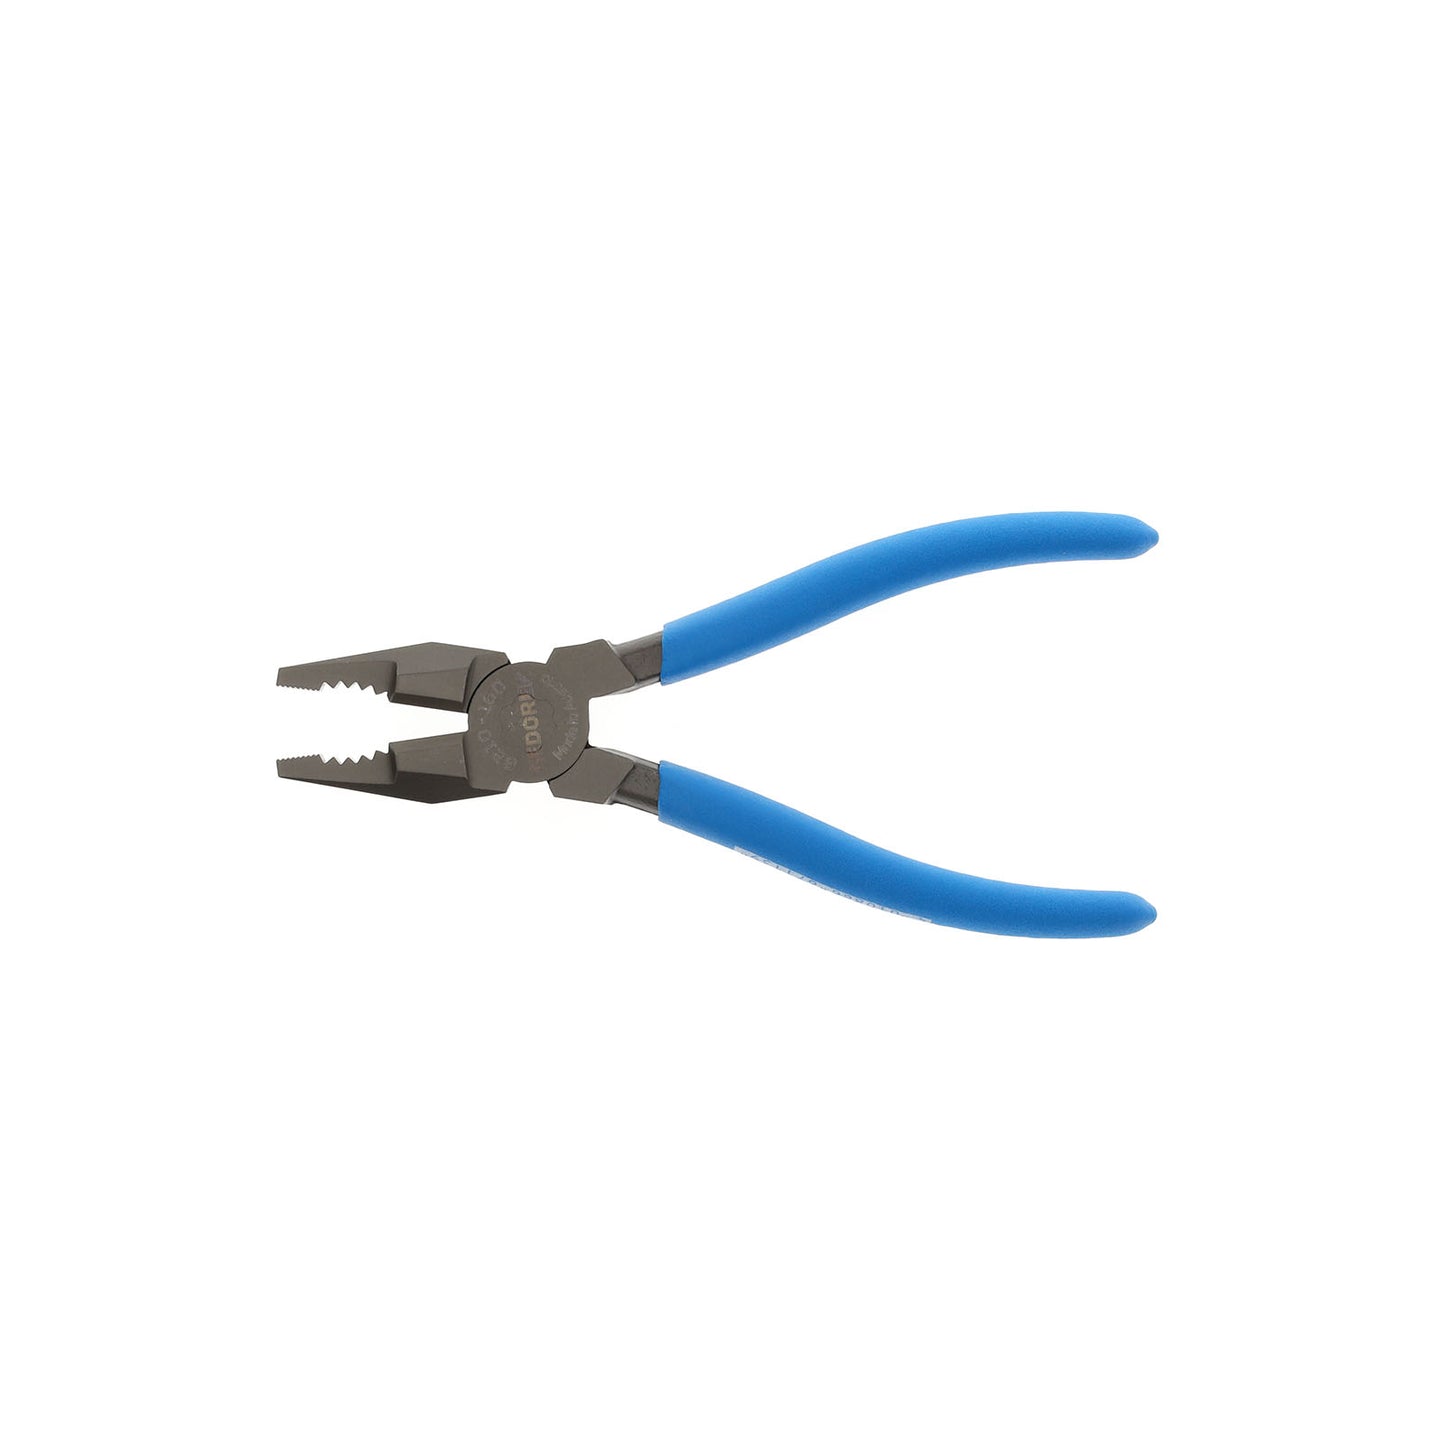 GEDORE 8210-160 TL - Universal pliers 160 mm (6711340)